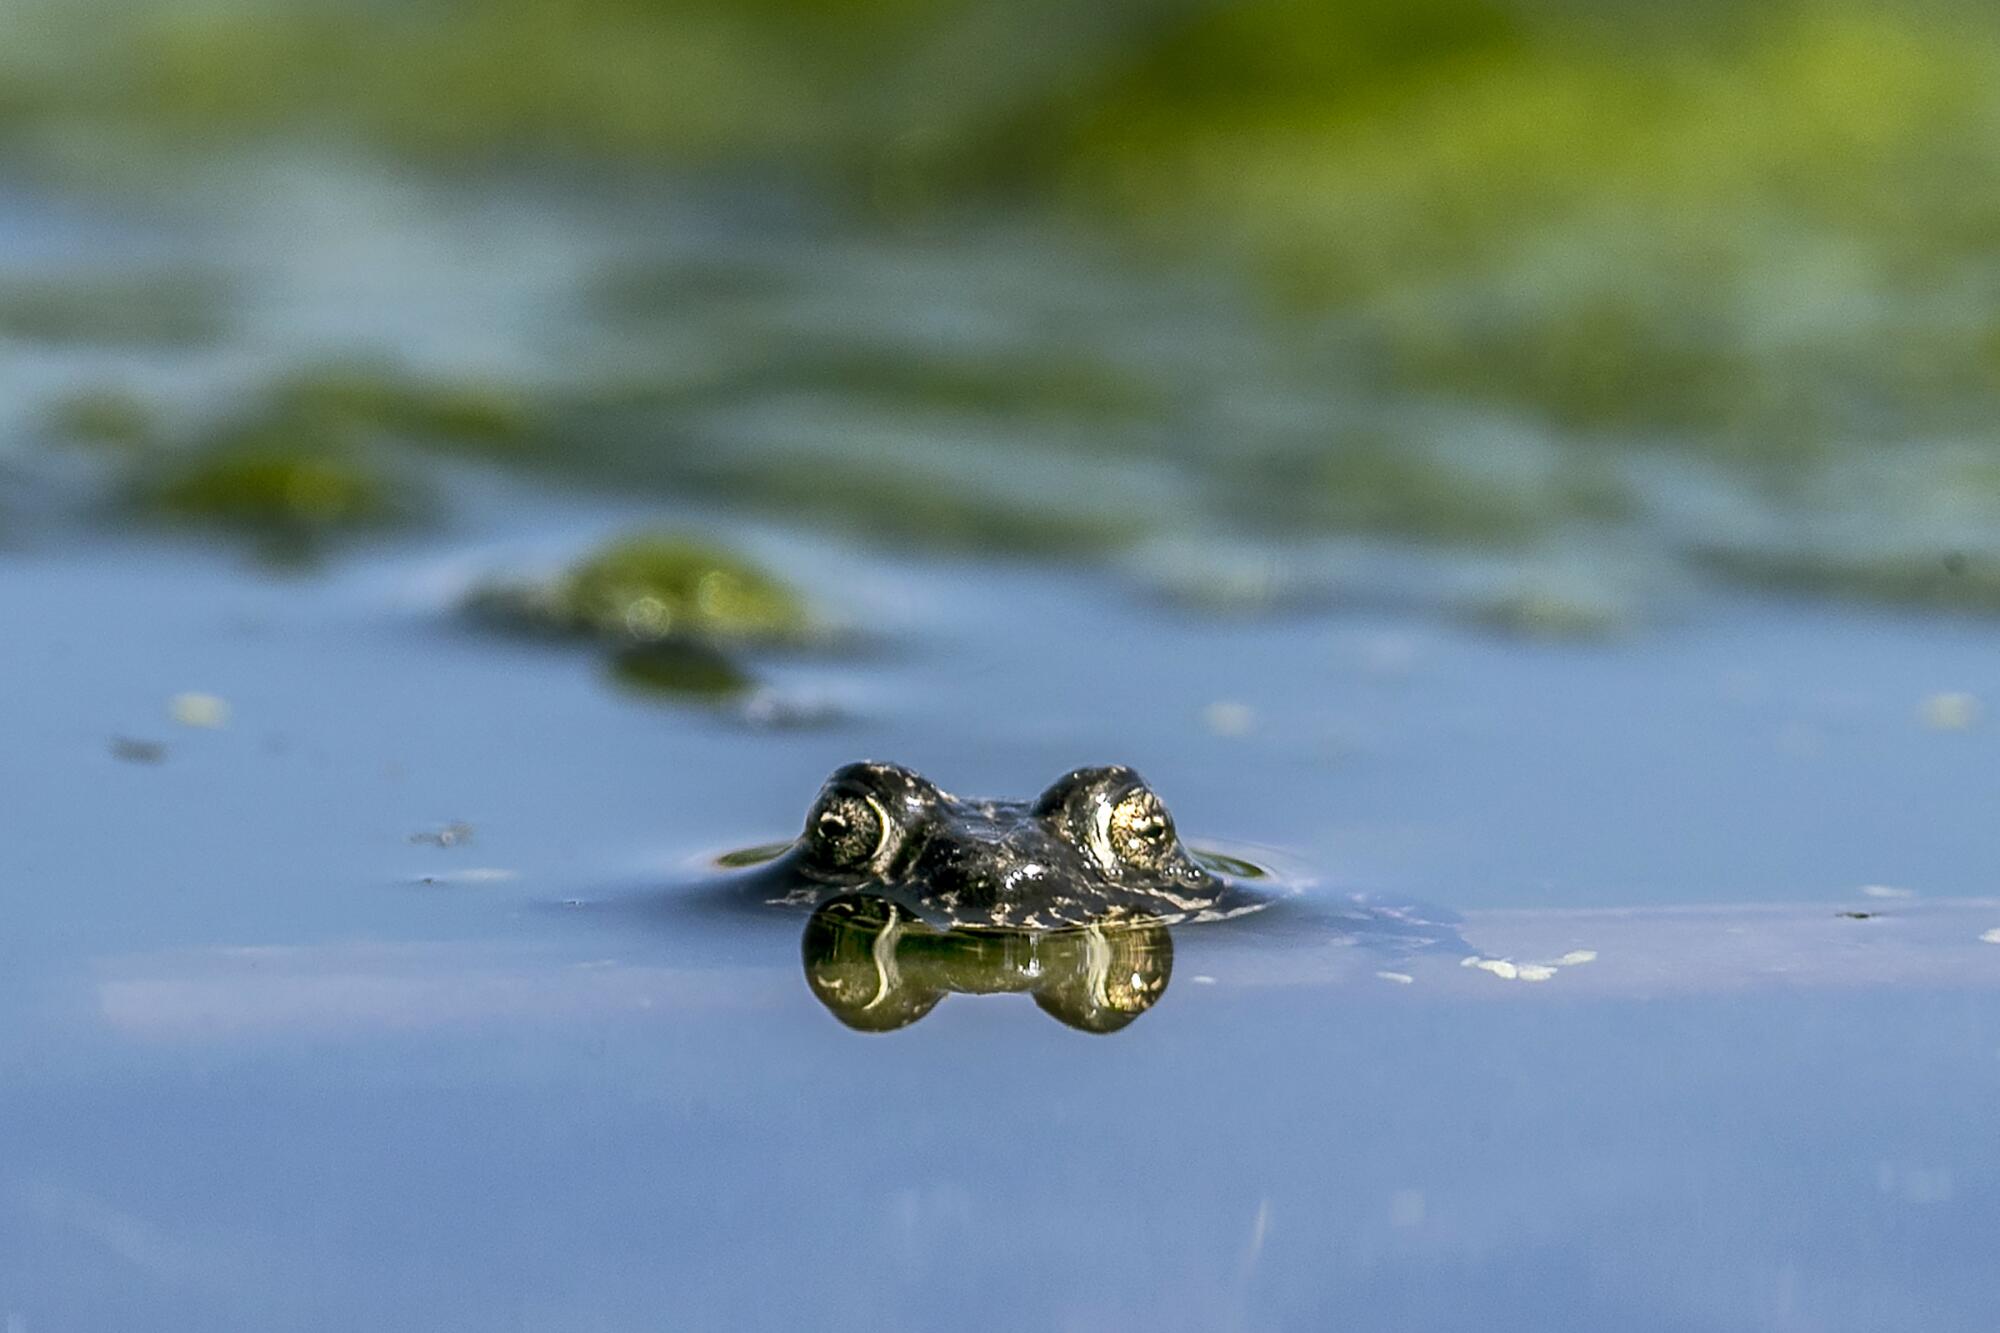 The endangered Black toad has the smallest range of any amphibian in North America.